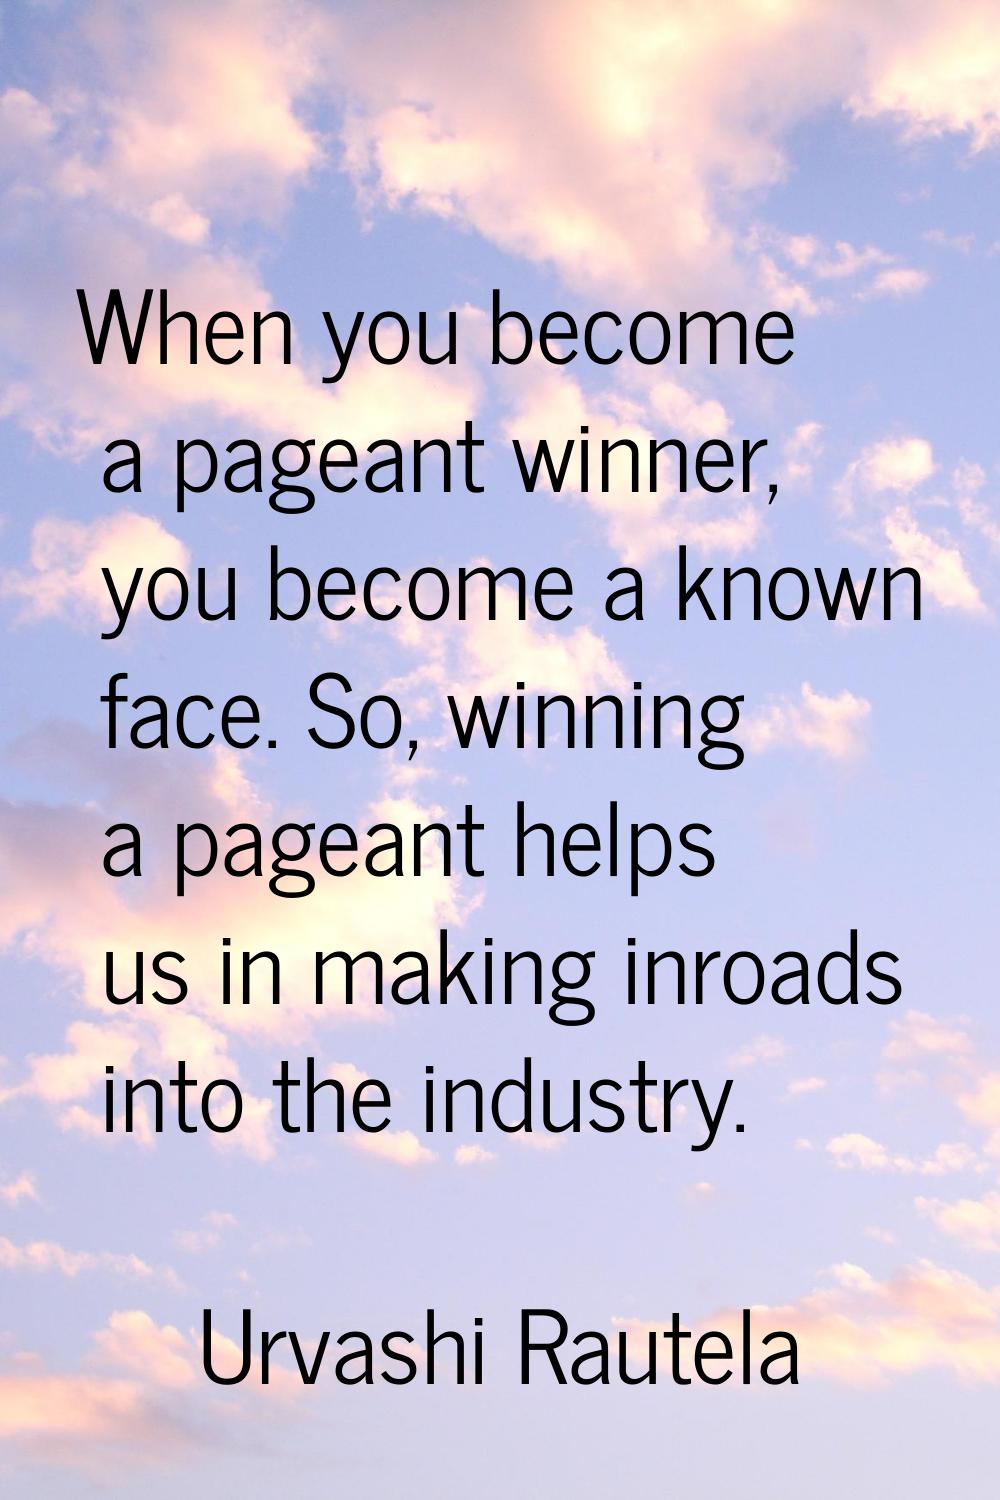 When you become a pageant winner, you become a known face. So, winning a pageant helps us in making